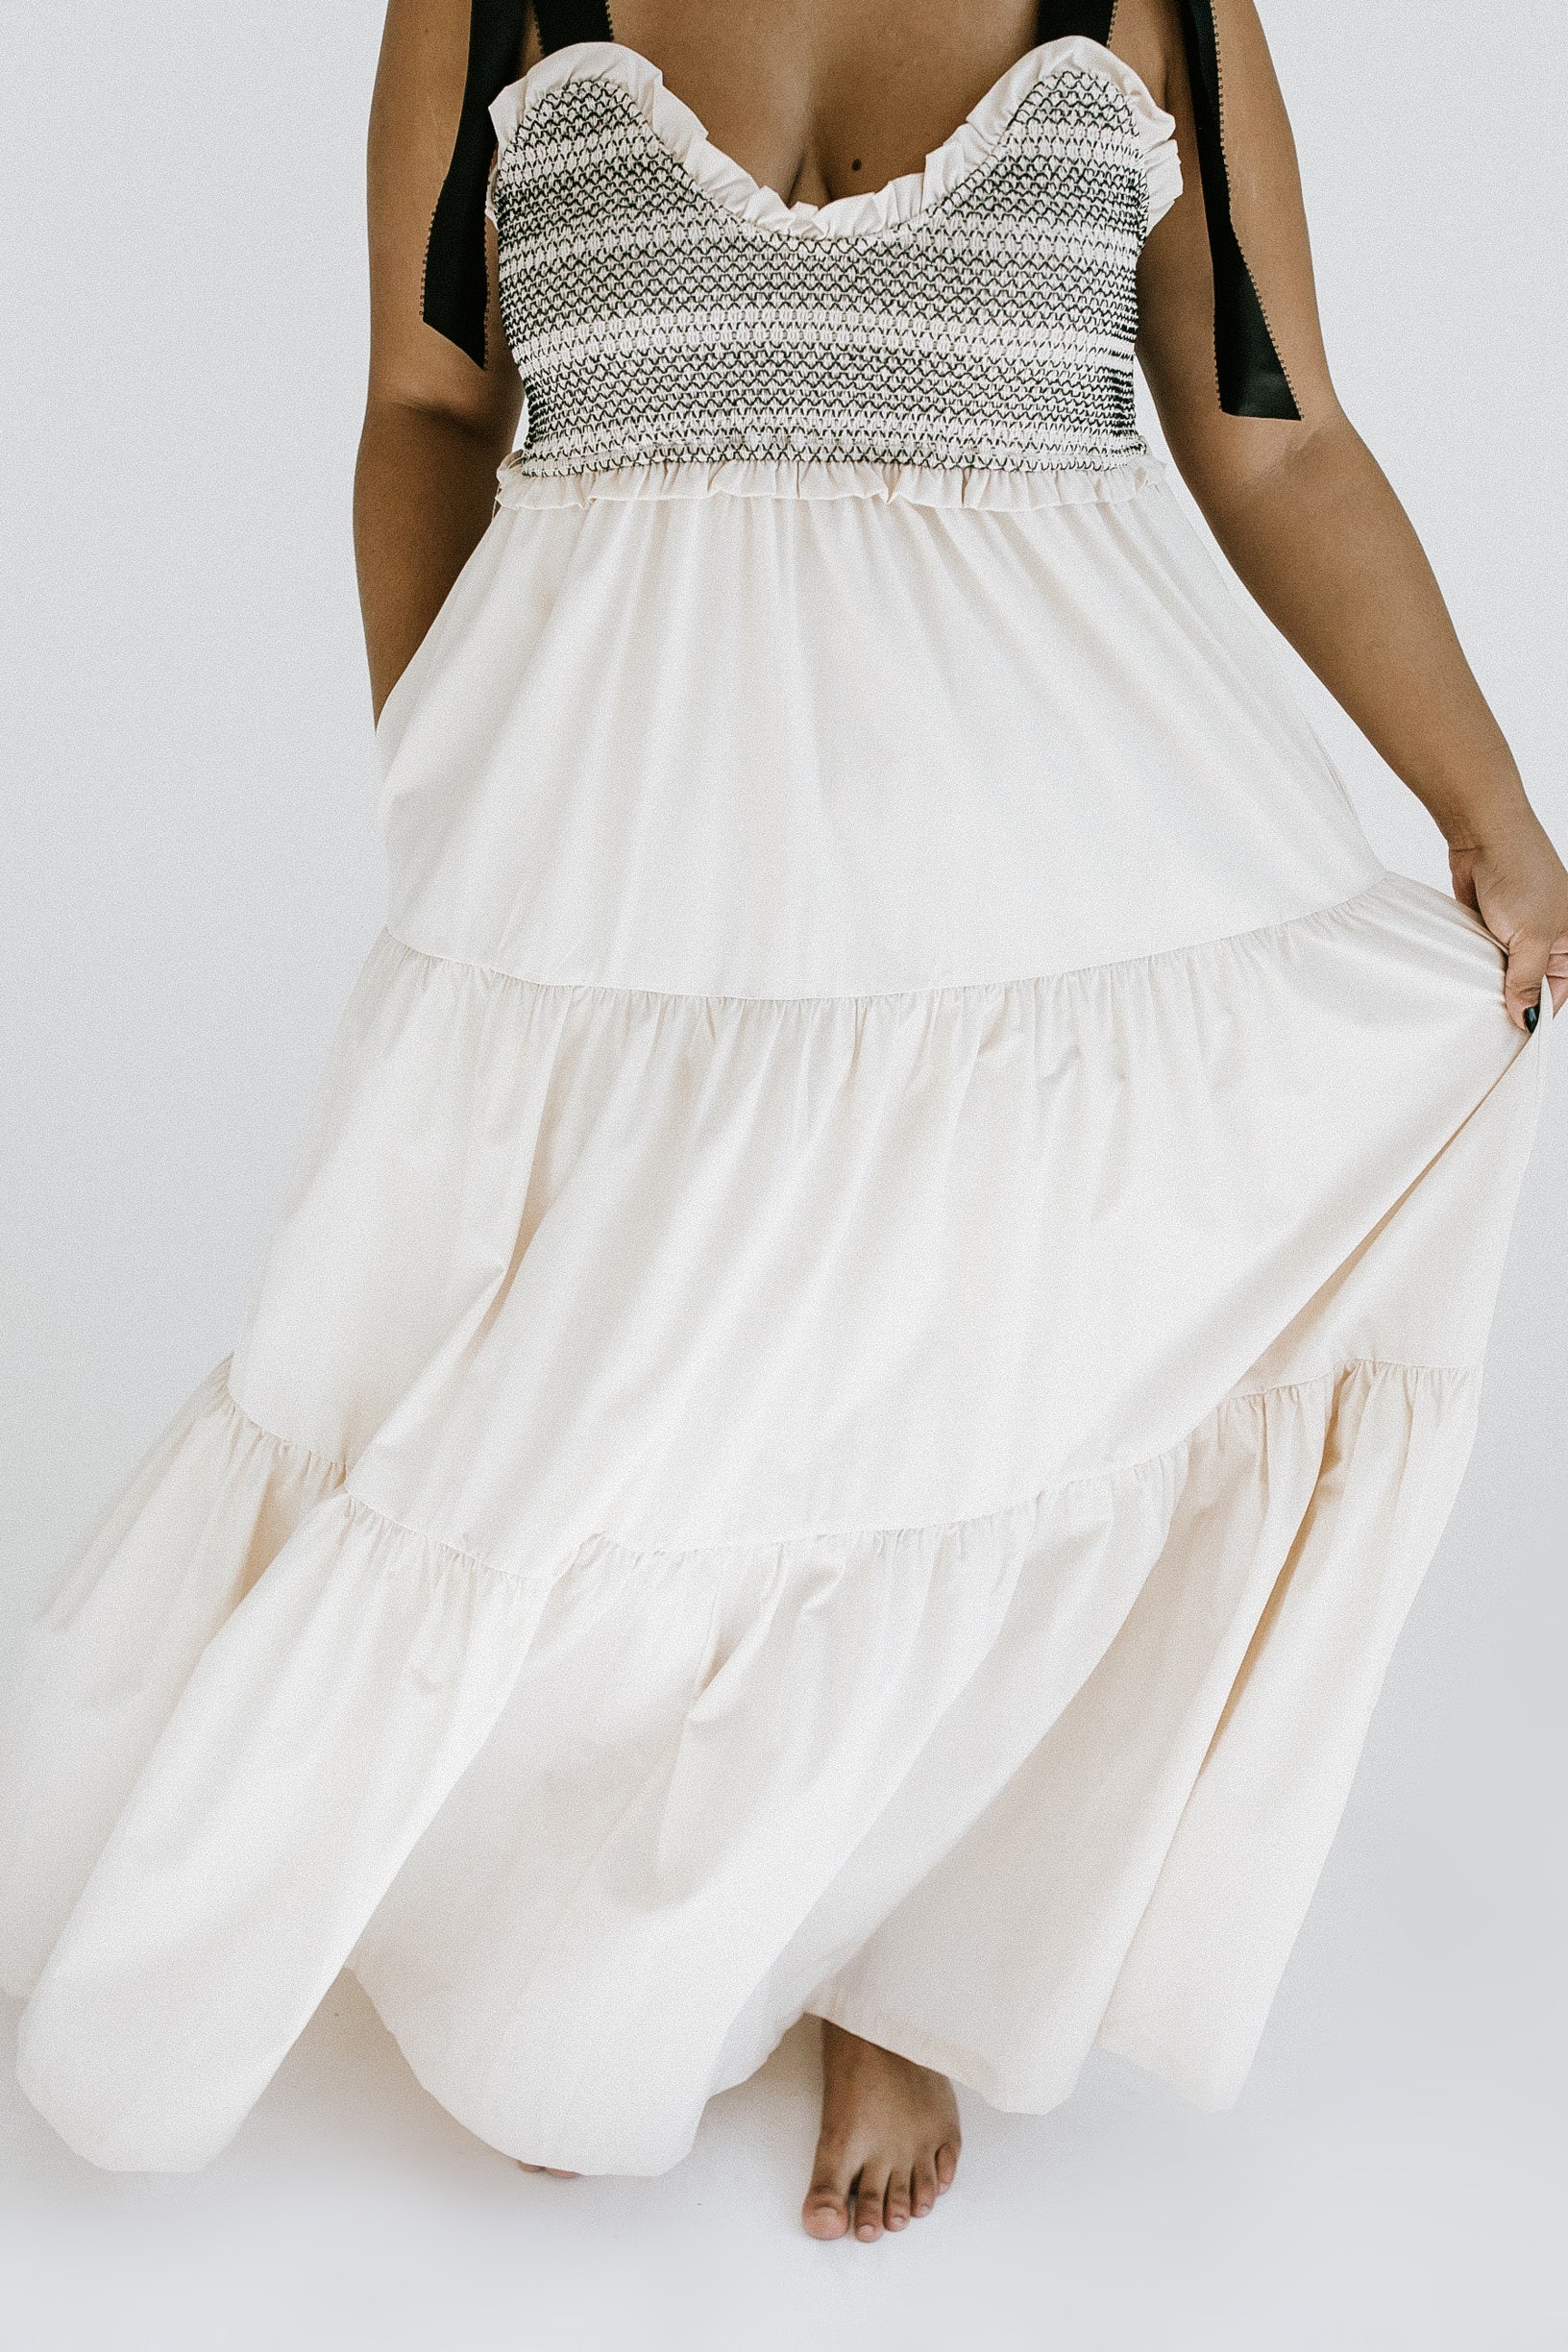 After The Sun Maxi Dress - Beige - More Sizes